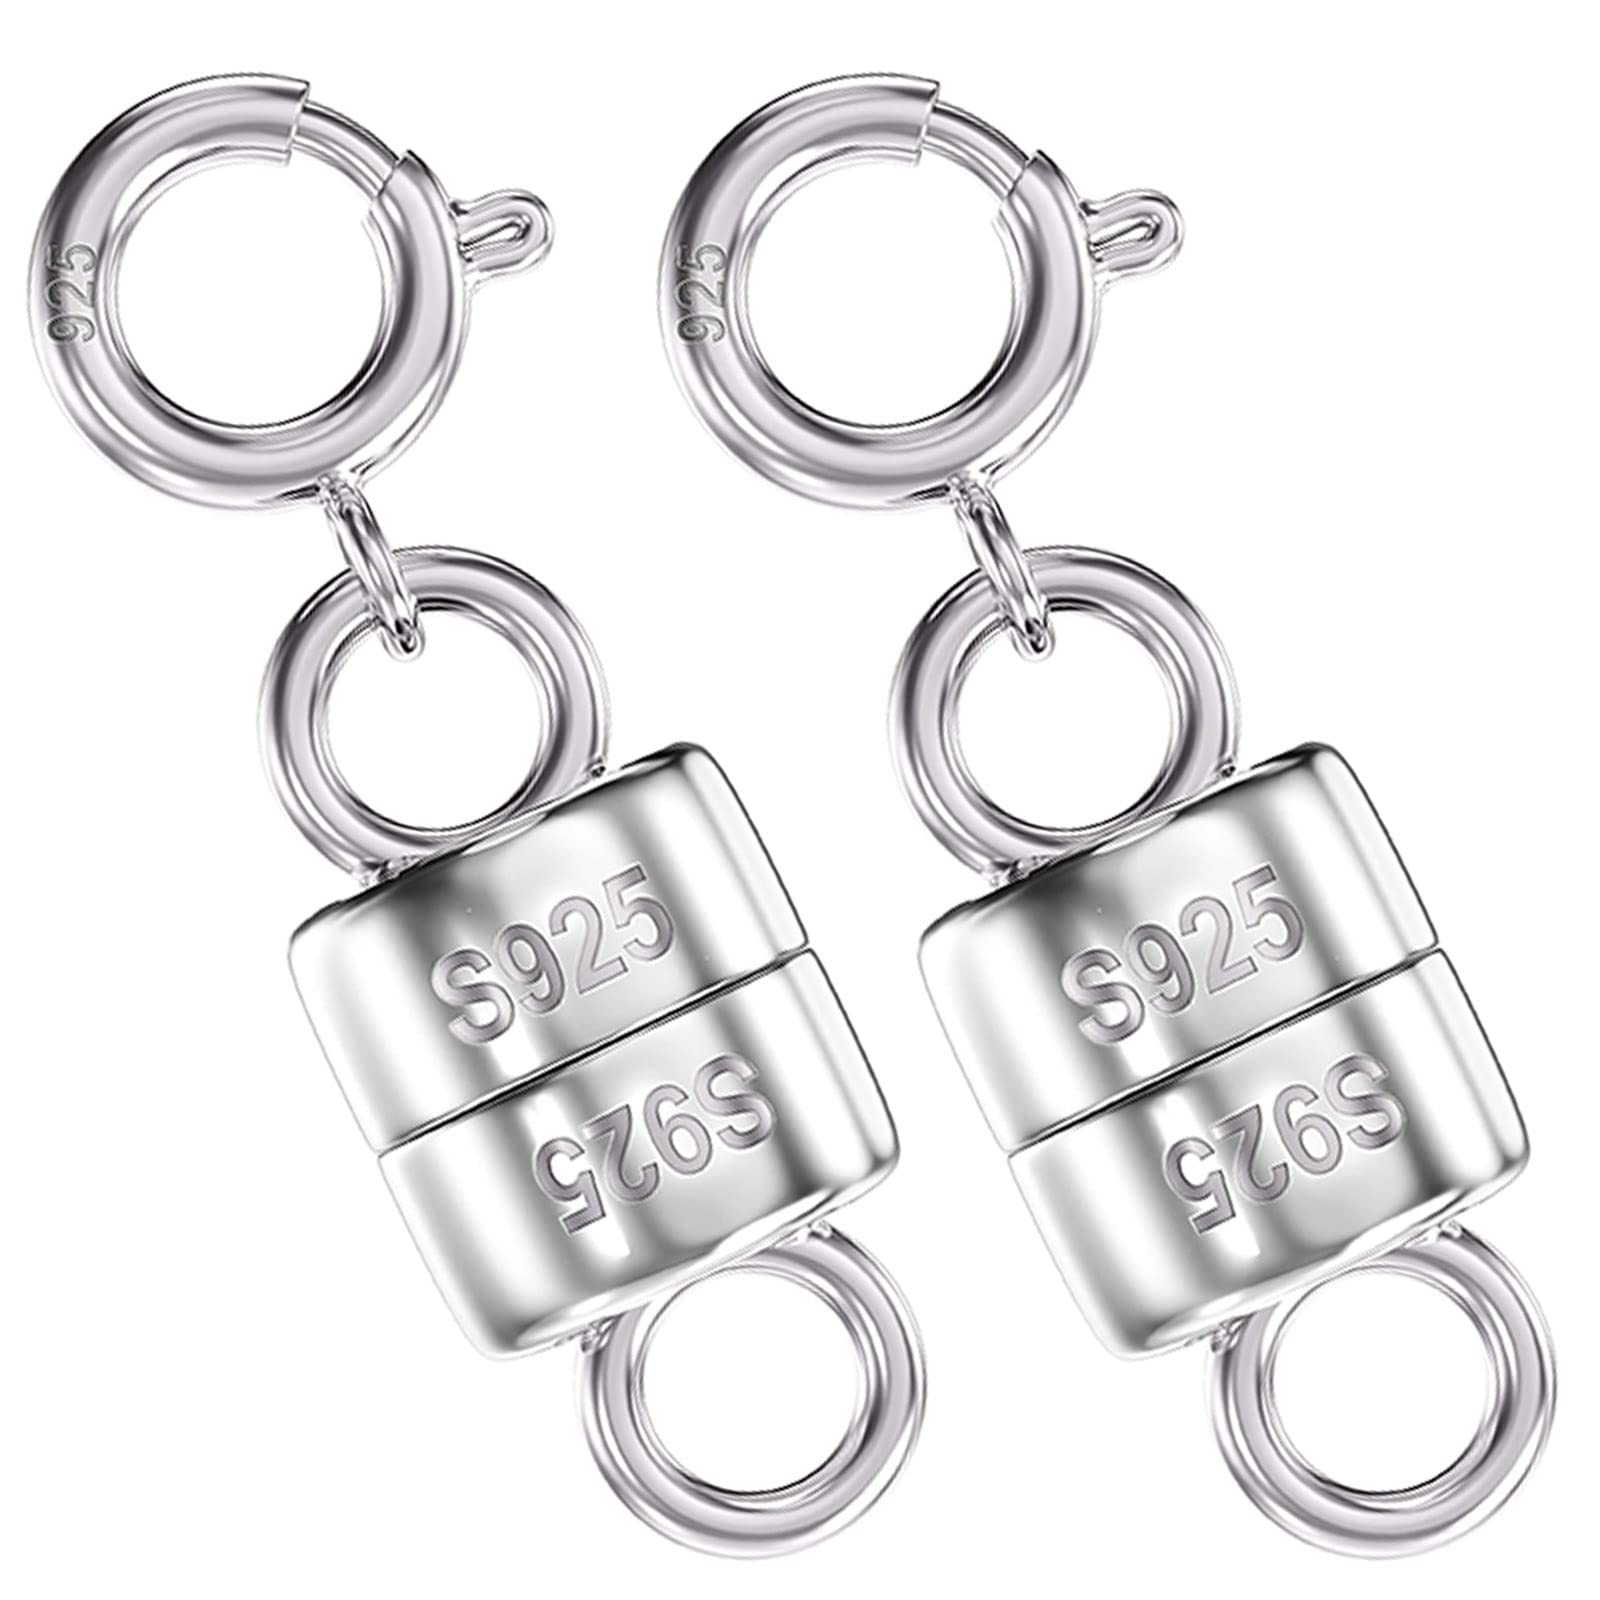 Qulltk 925 Sterling Silver Magnetic Necklace Clasps and Closures,Mini  Bracelets Clasp Converter Gold and Silver Chain Extender for Jewelry Making  Supplies 2Pcs Silver